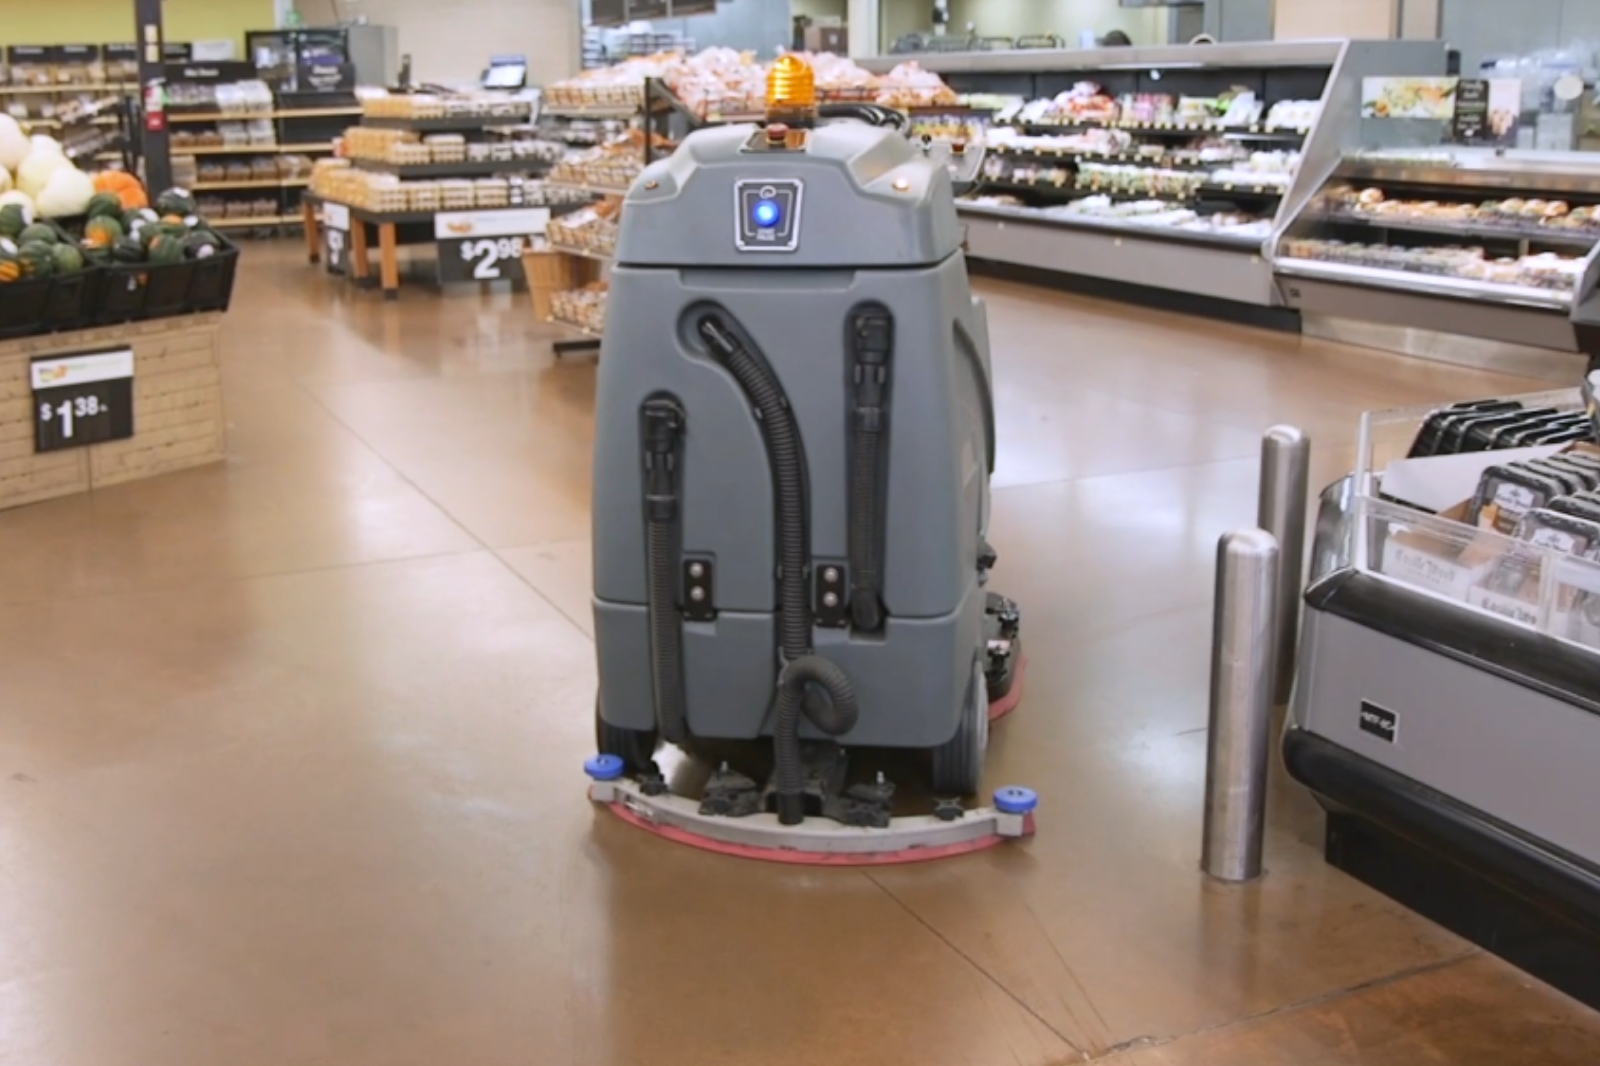 Walmart doubles down on robots in a move to free up its staff image 1